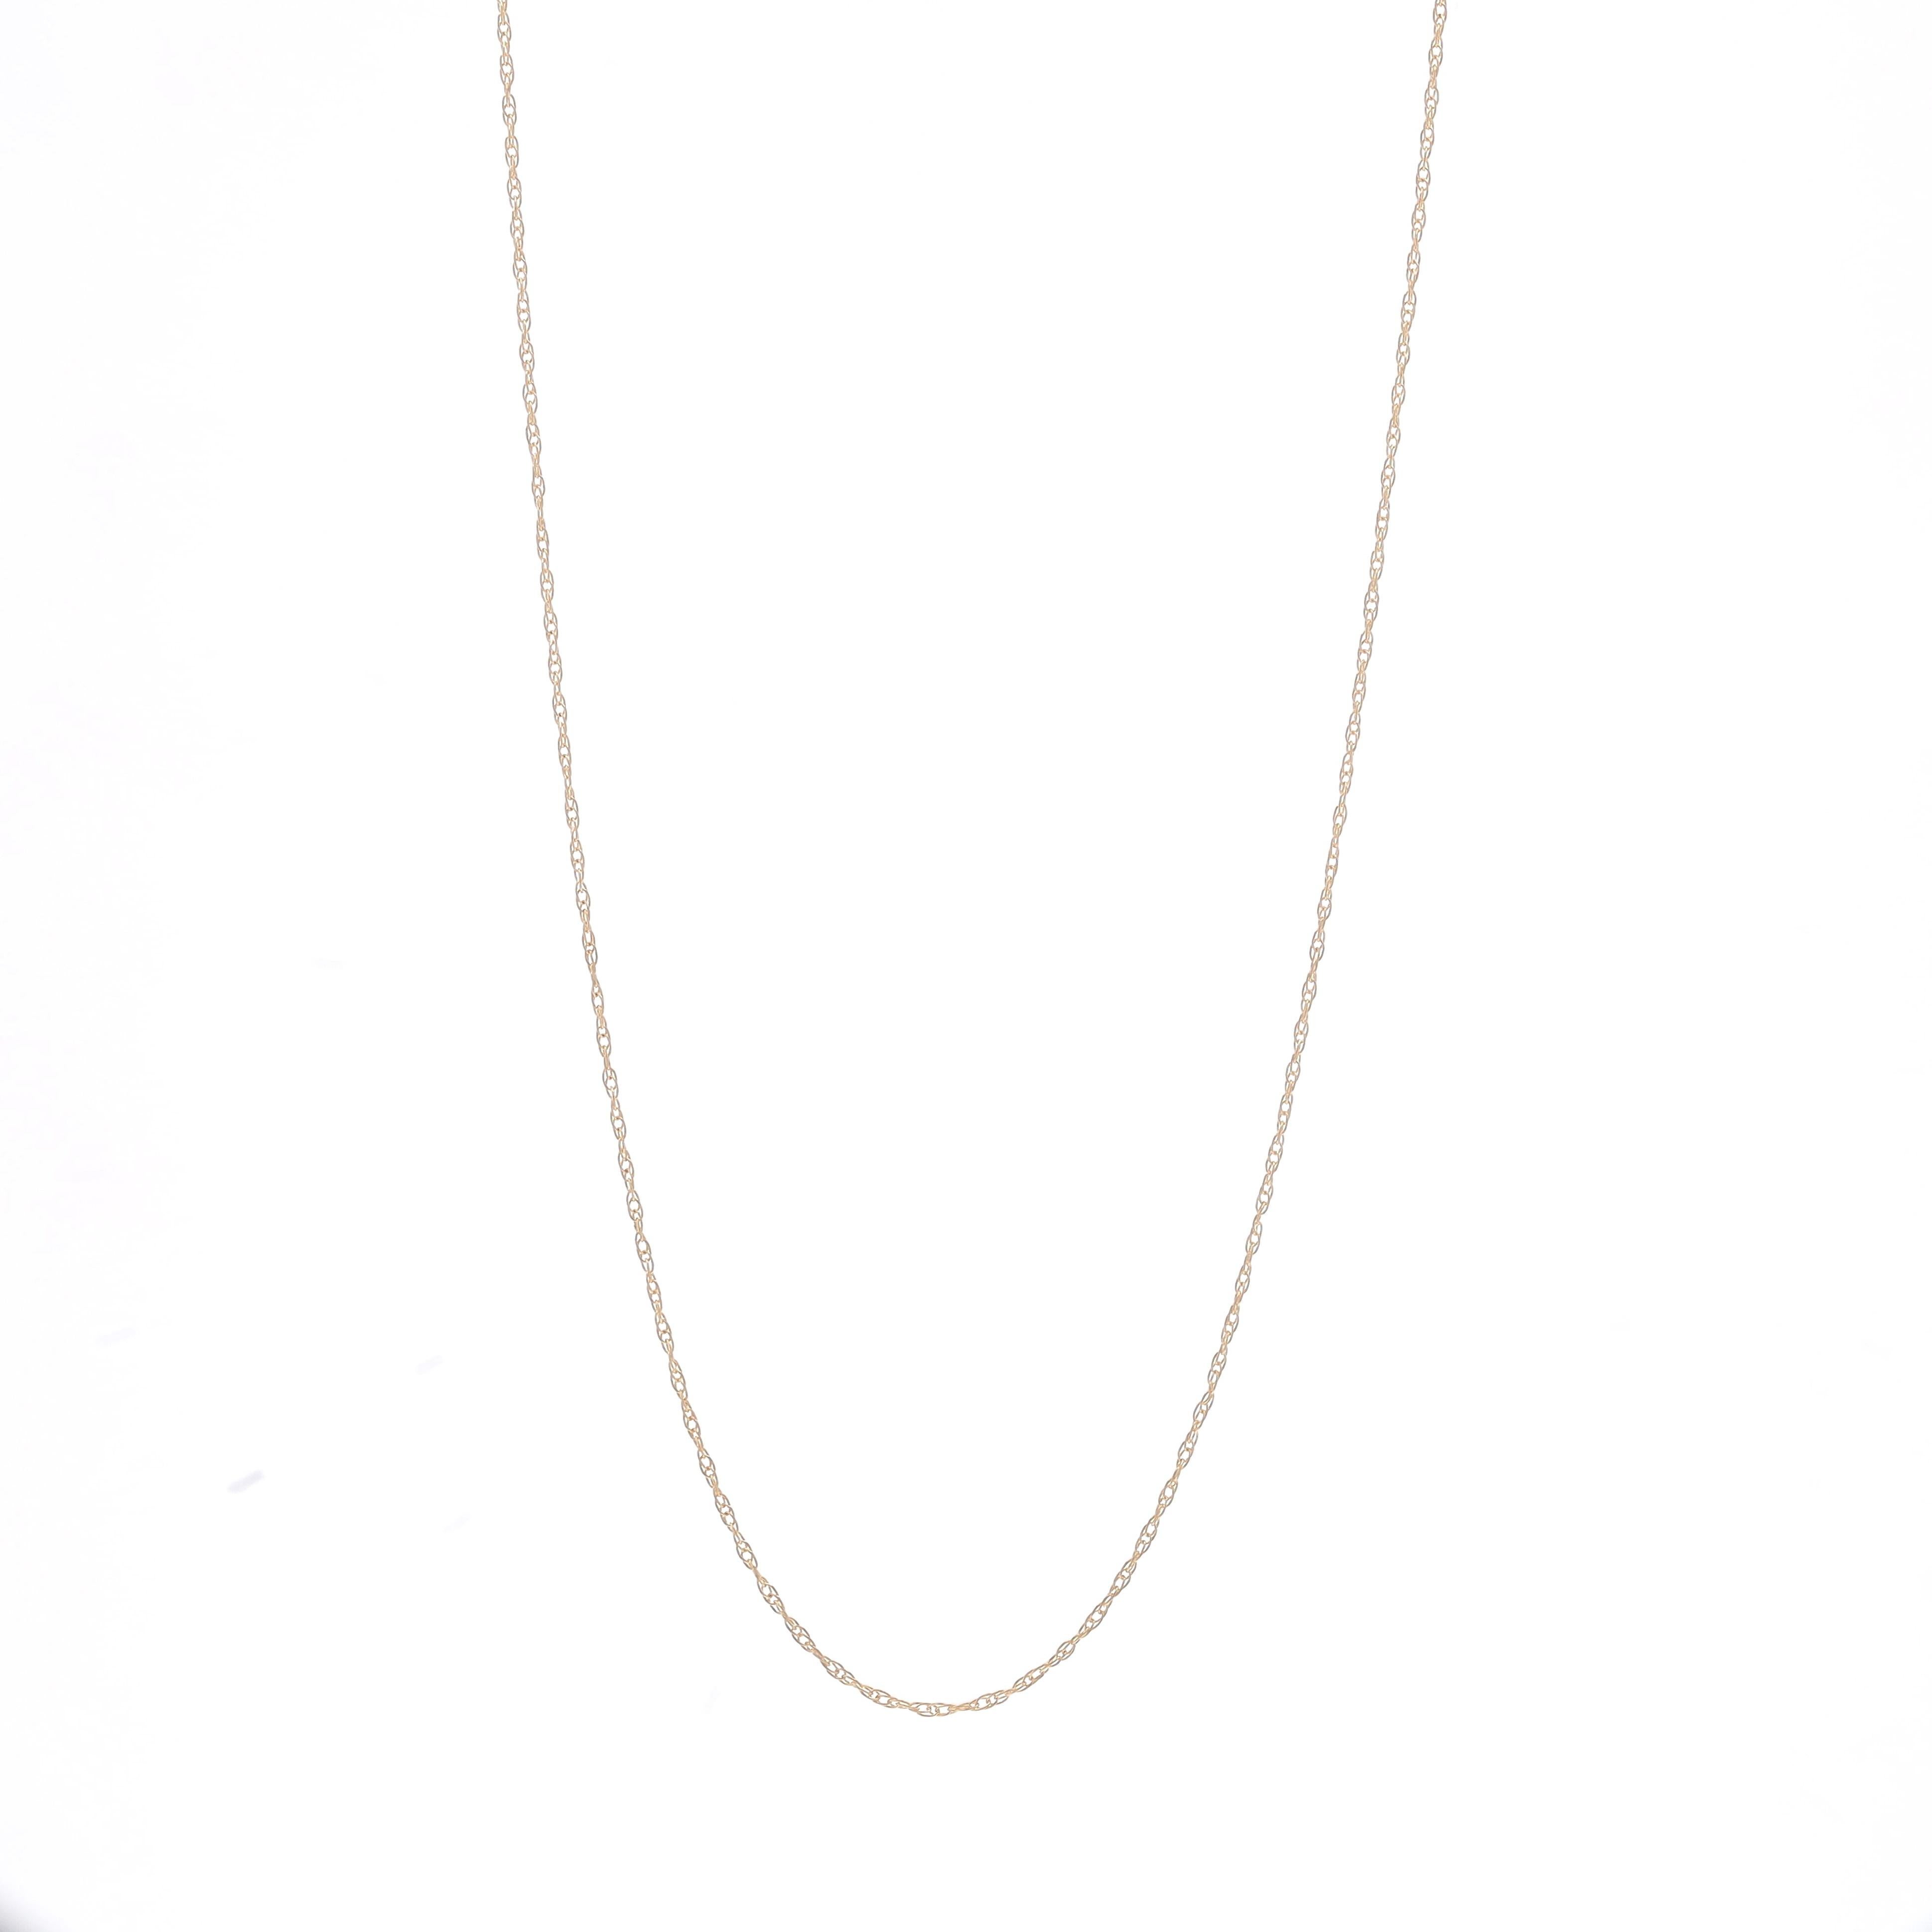 Metal Content: 14k Yellow Gold

Chain Style: Prince of Wales
Necklace Style: Chain
Fastening Type: Spring Ring Clasp

Measurements

Length: 18 1/4